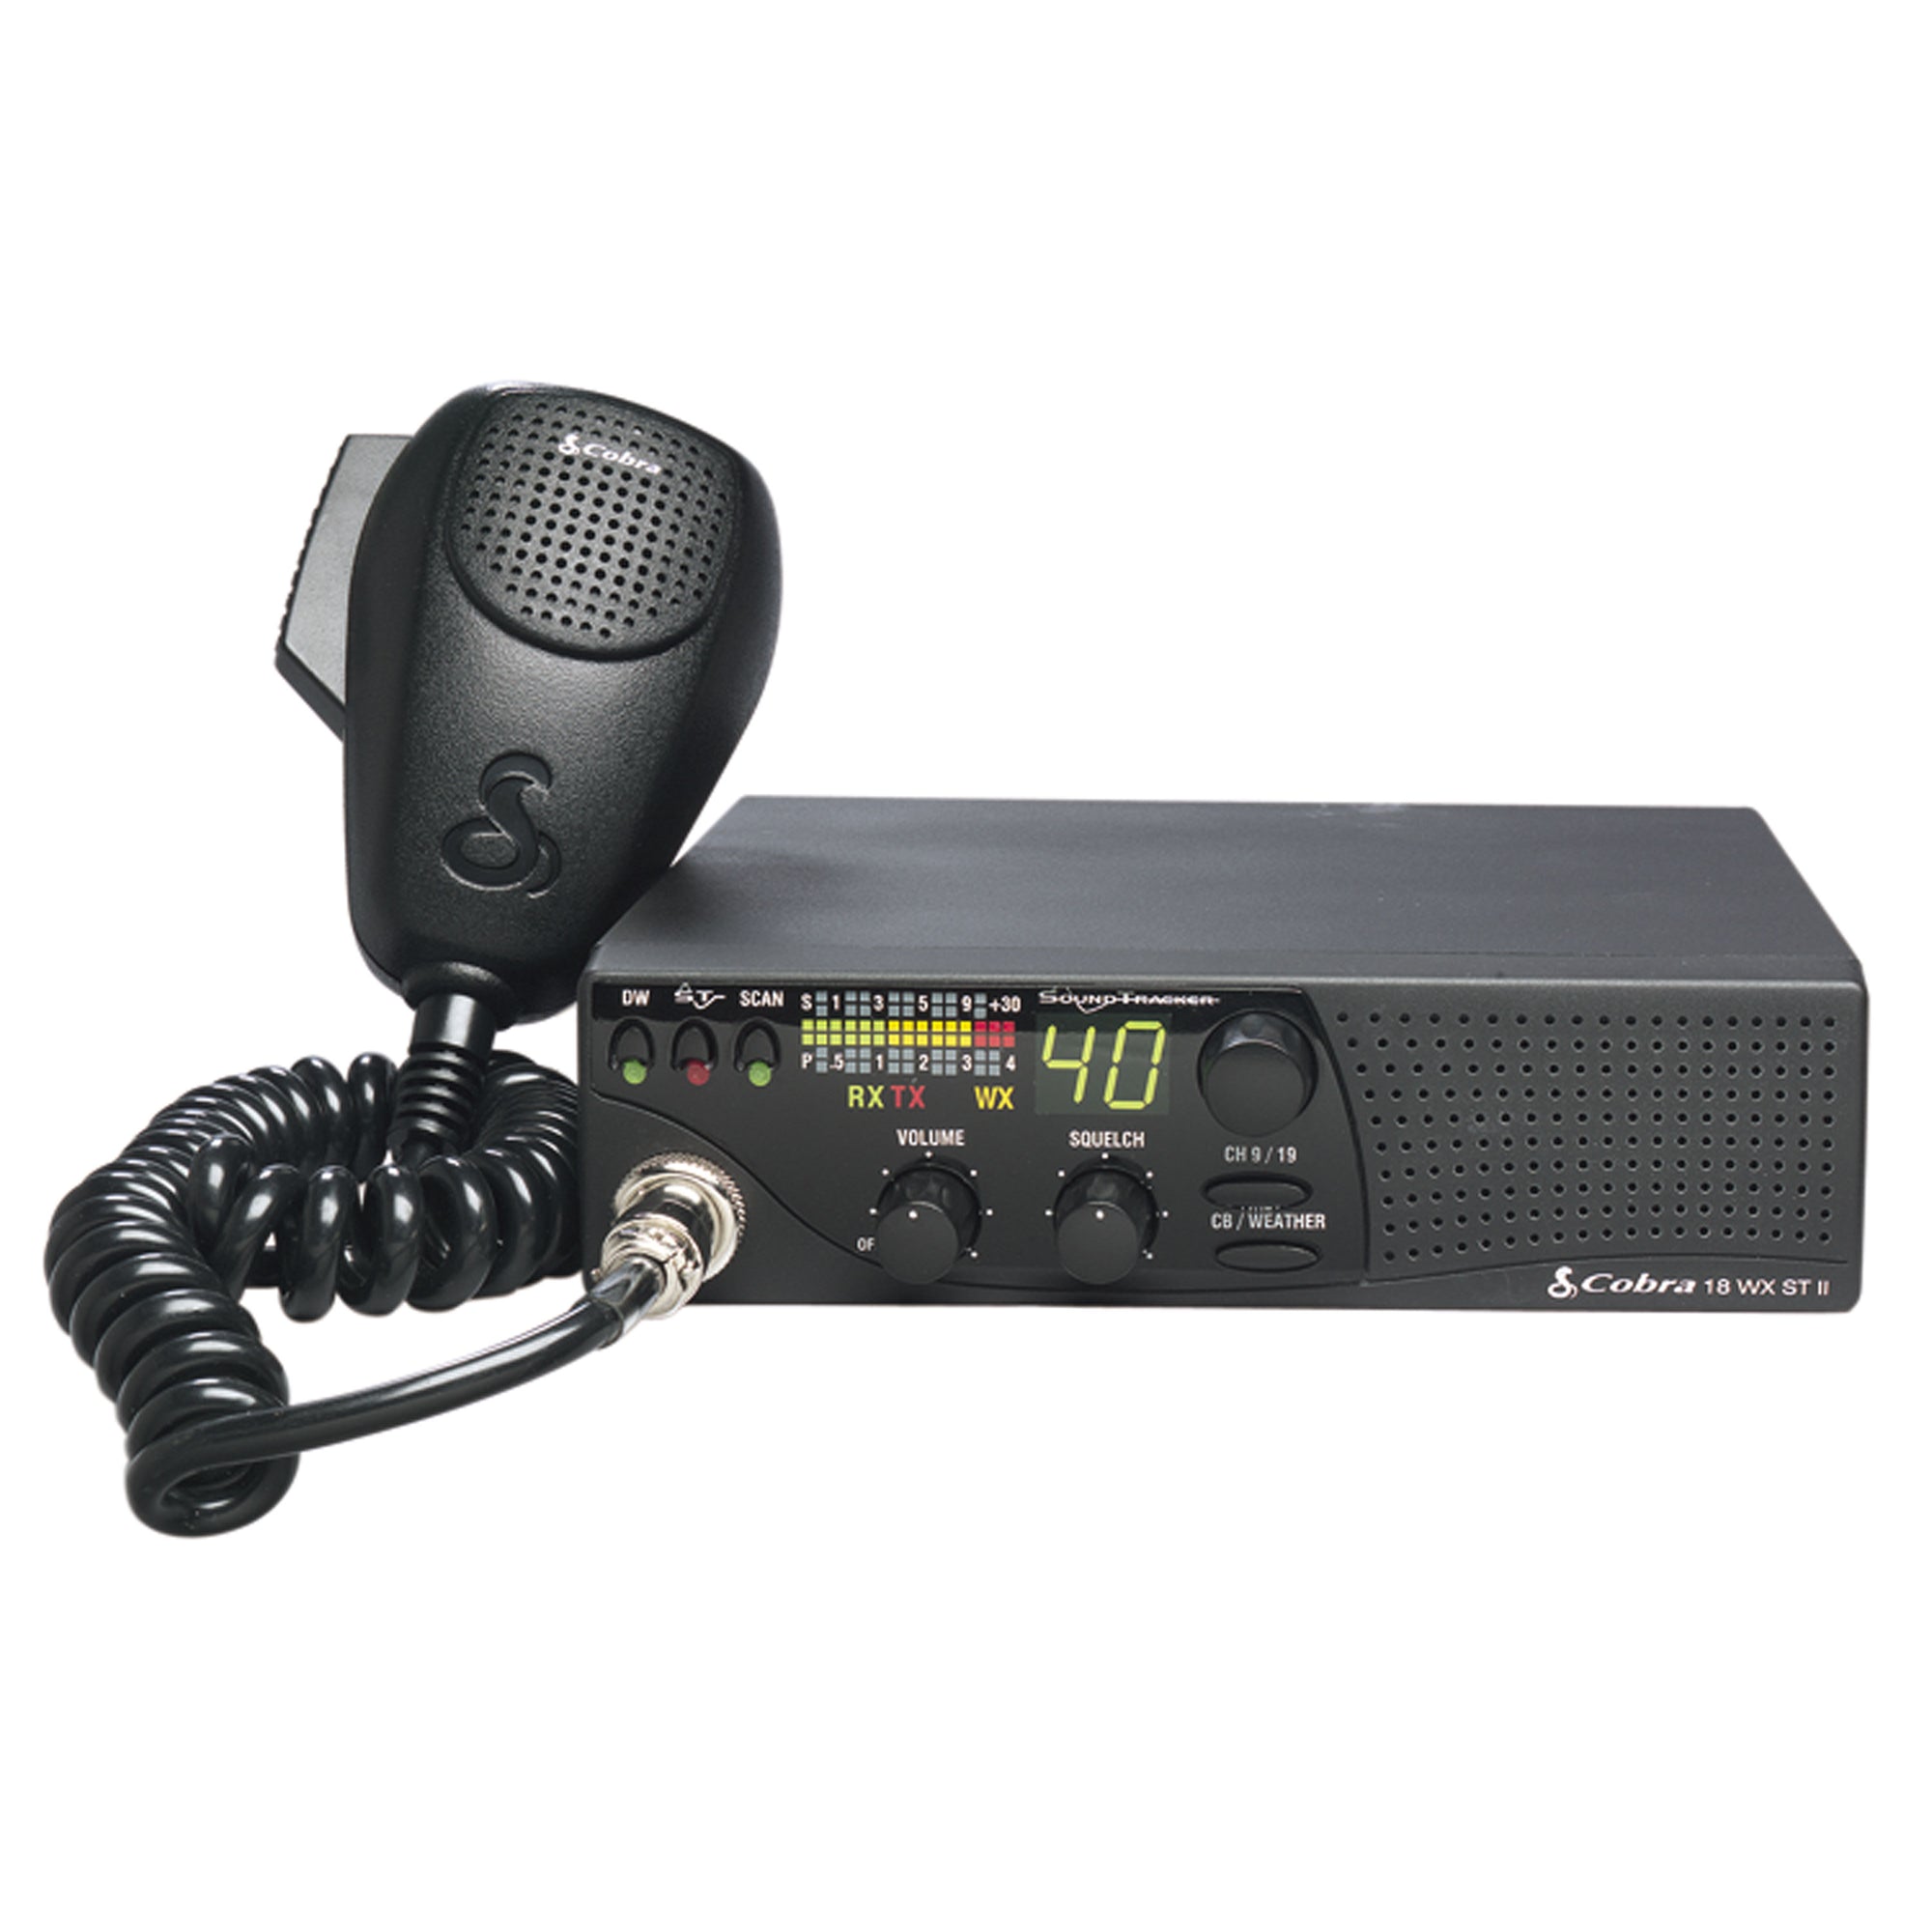 Cobra 18 WX ST II Recreational CB Radio with Weather and Soundchecker